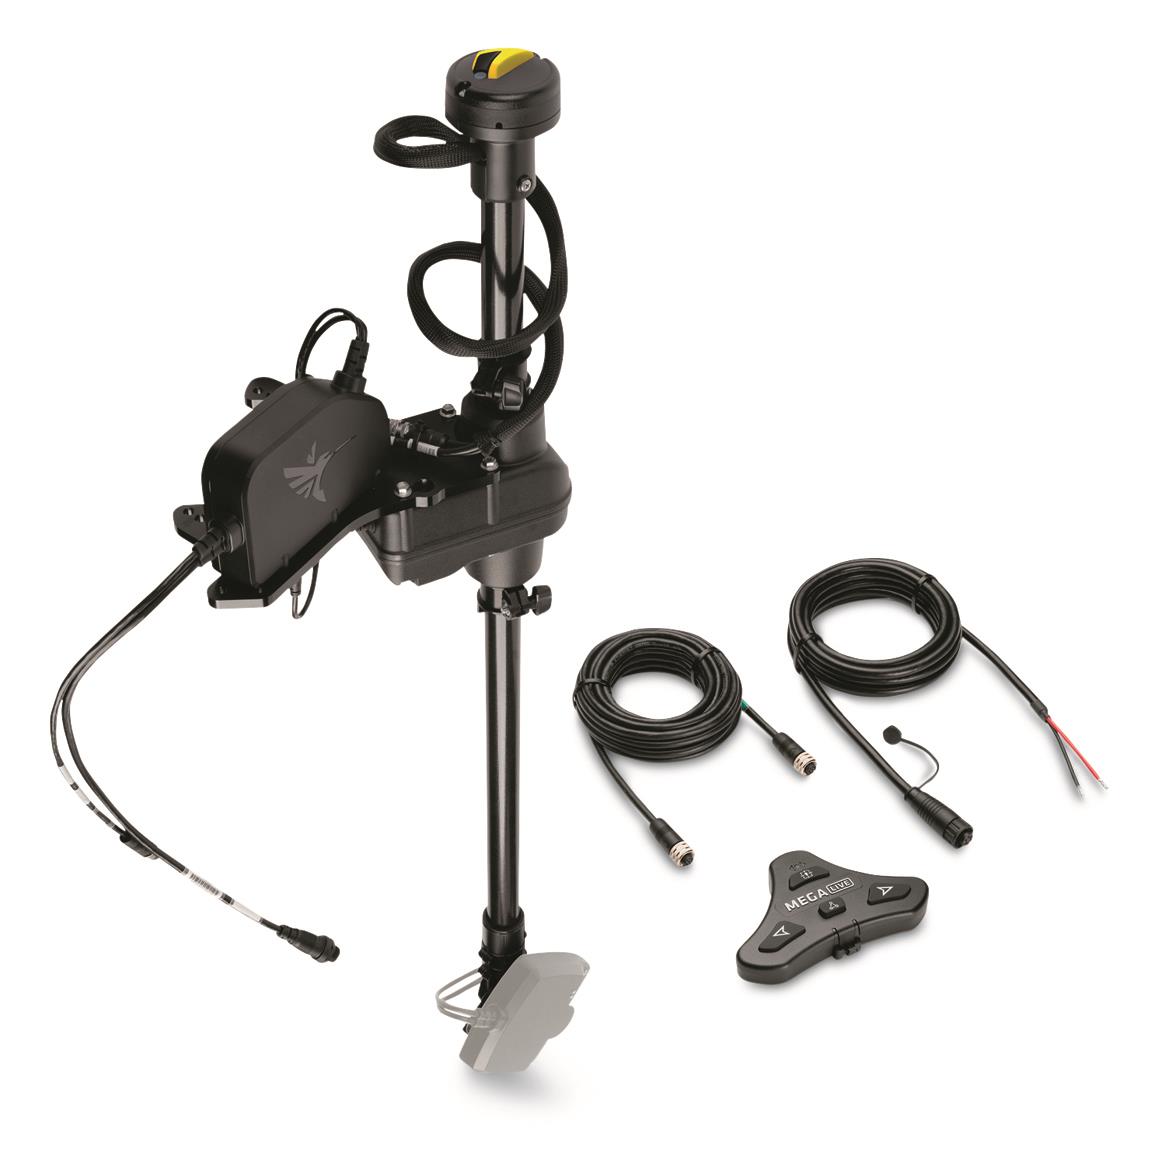 Includes MEGA Live Steering Assembly, Wireless Foot Pedal, Ultrex Mounting Kit and Hardware, 20' Ethernet Cable, and 10' Power Cable